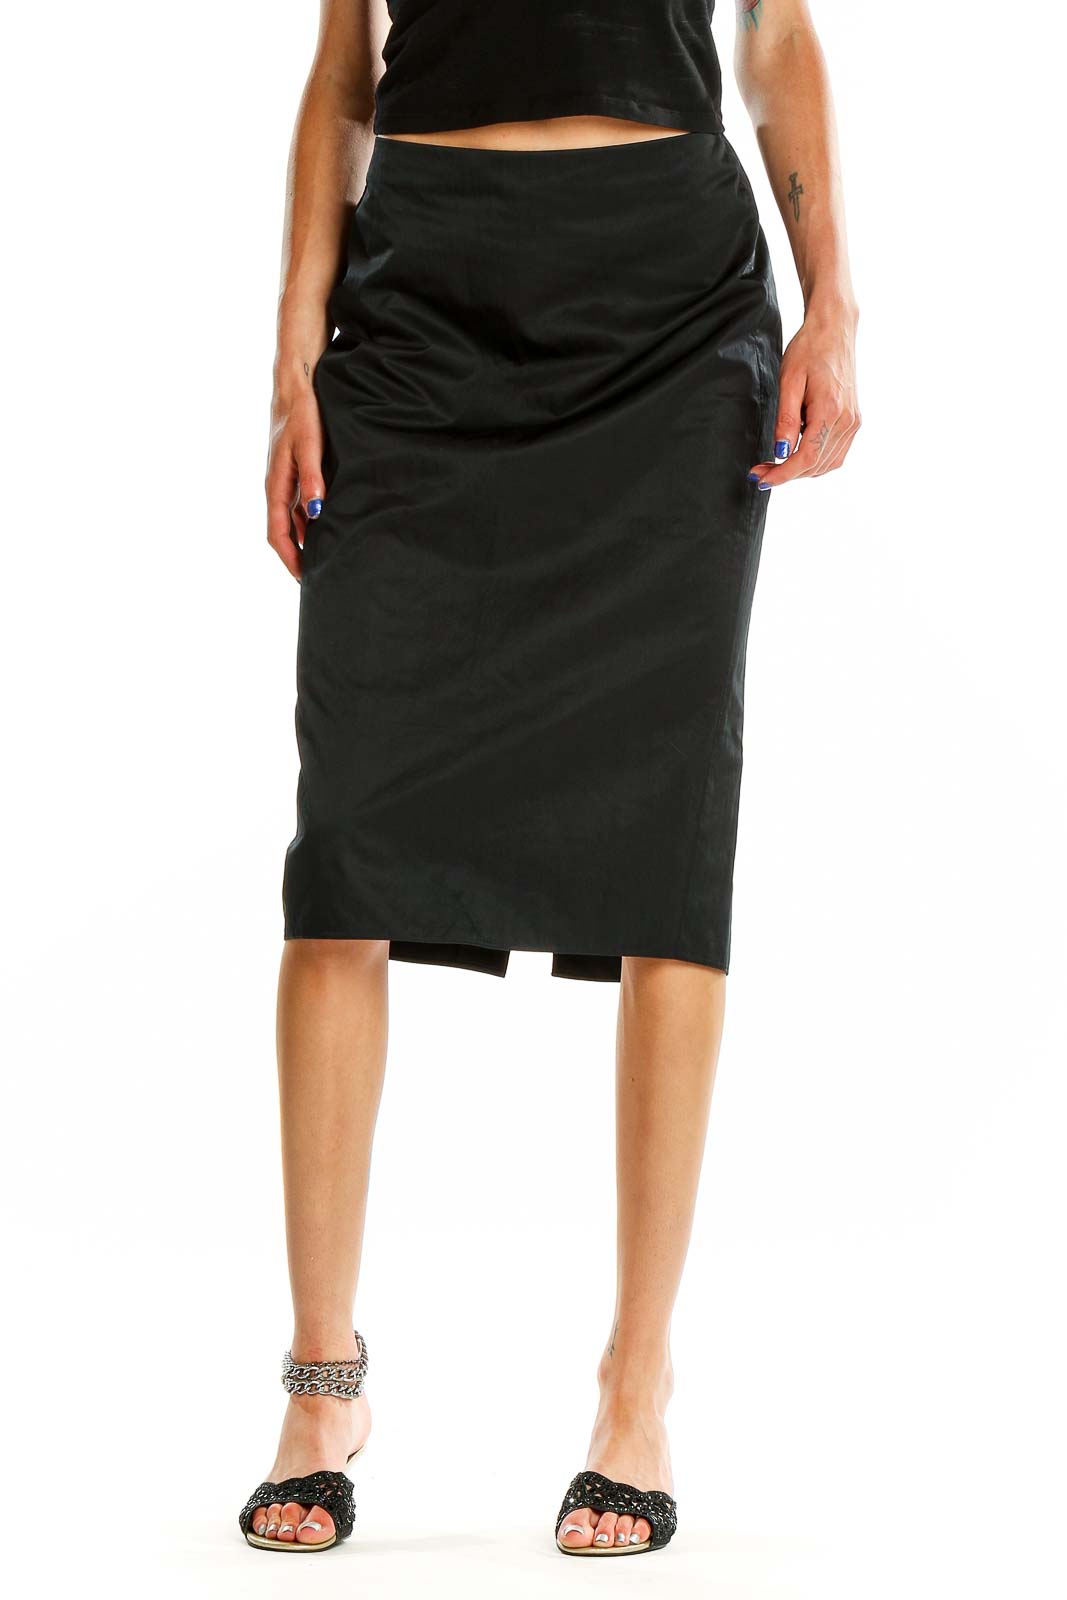 Black Solid Classic Pencil Skirt Front